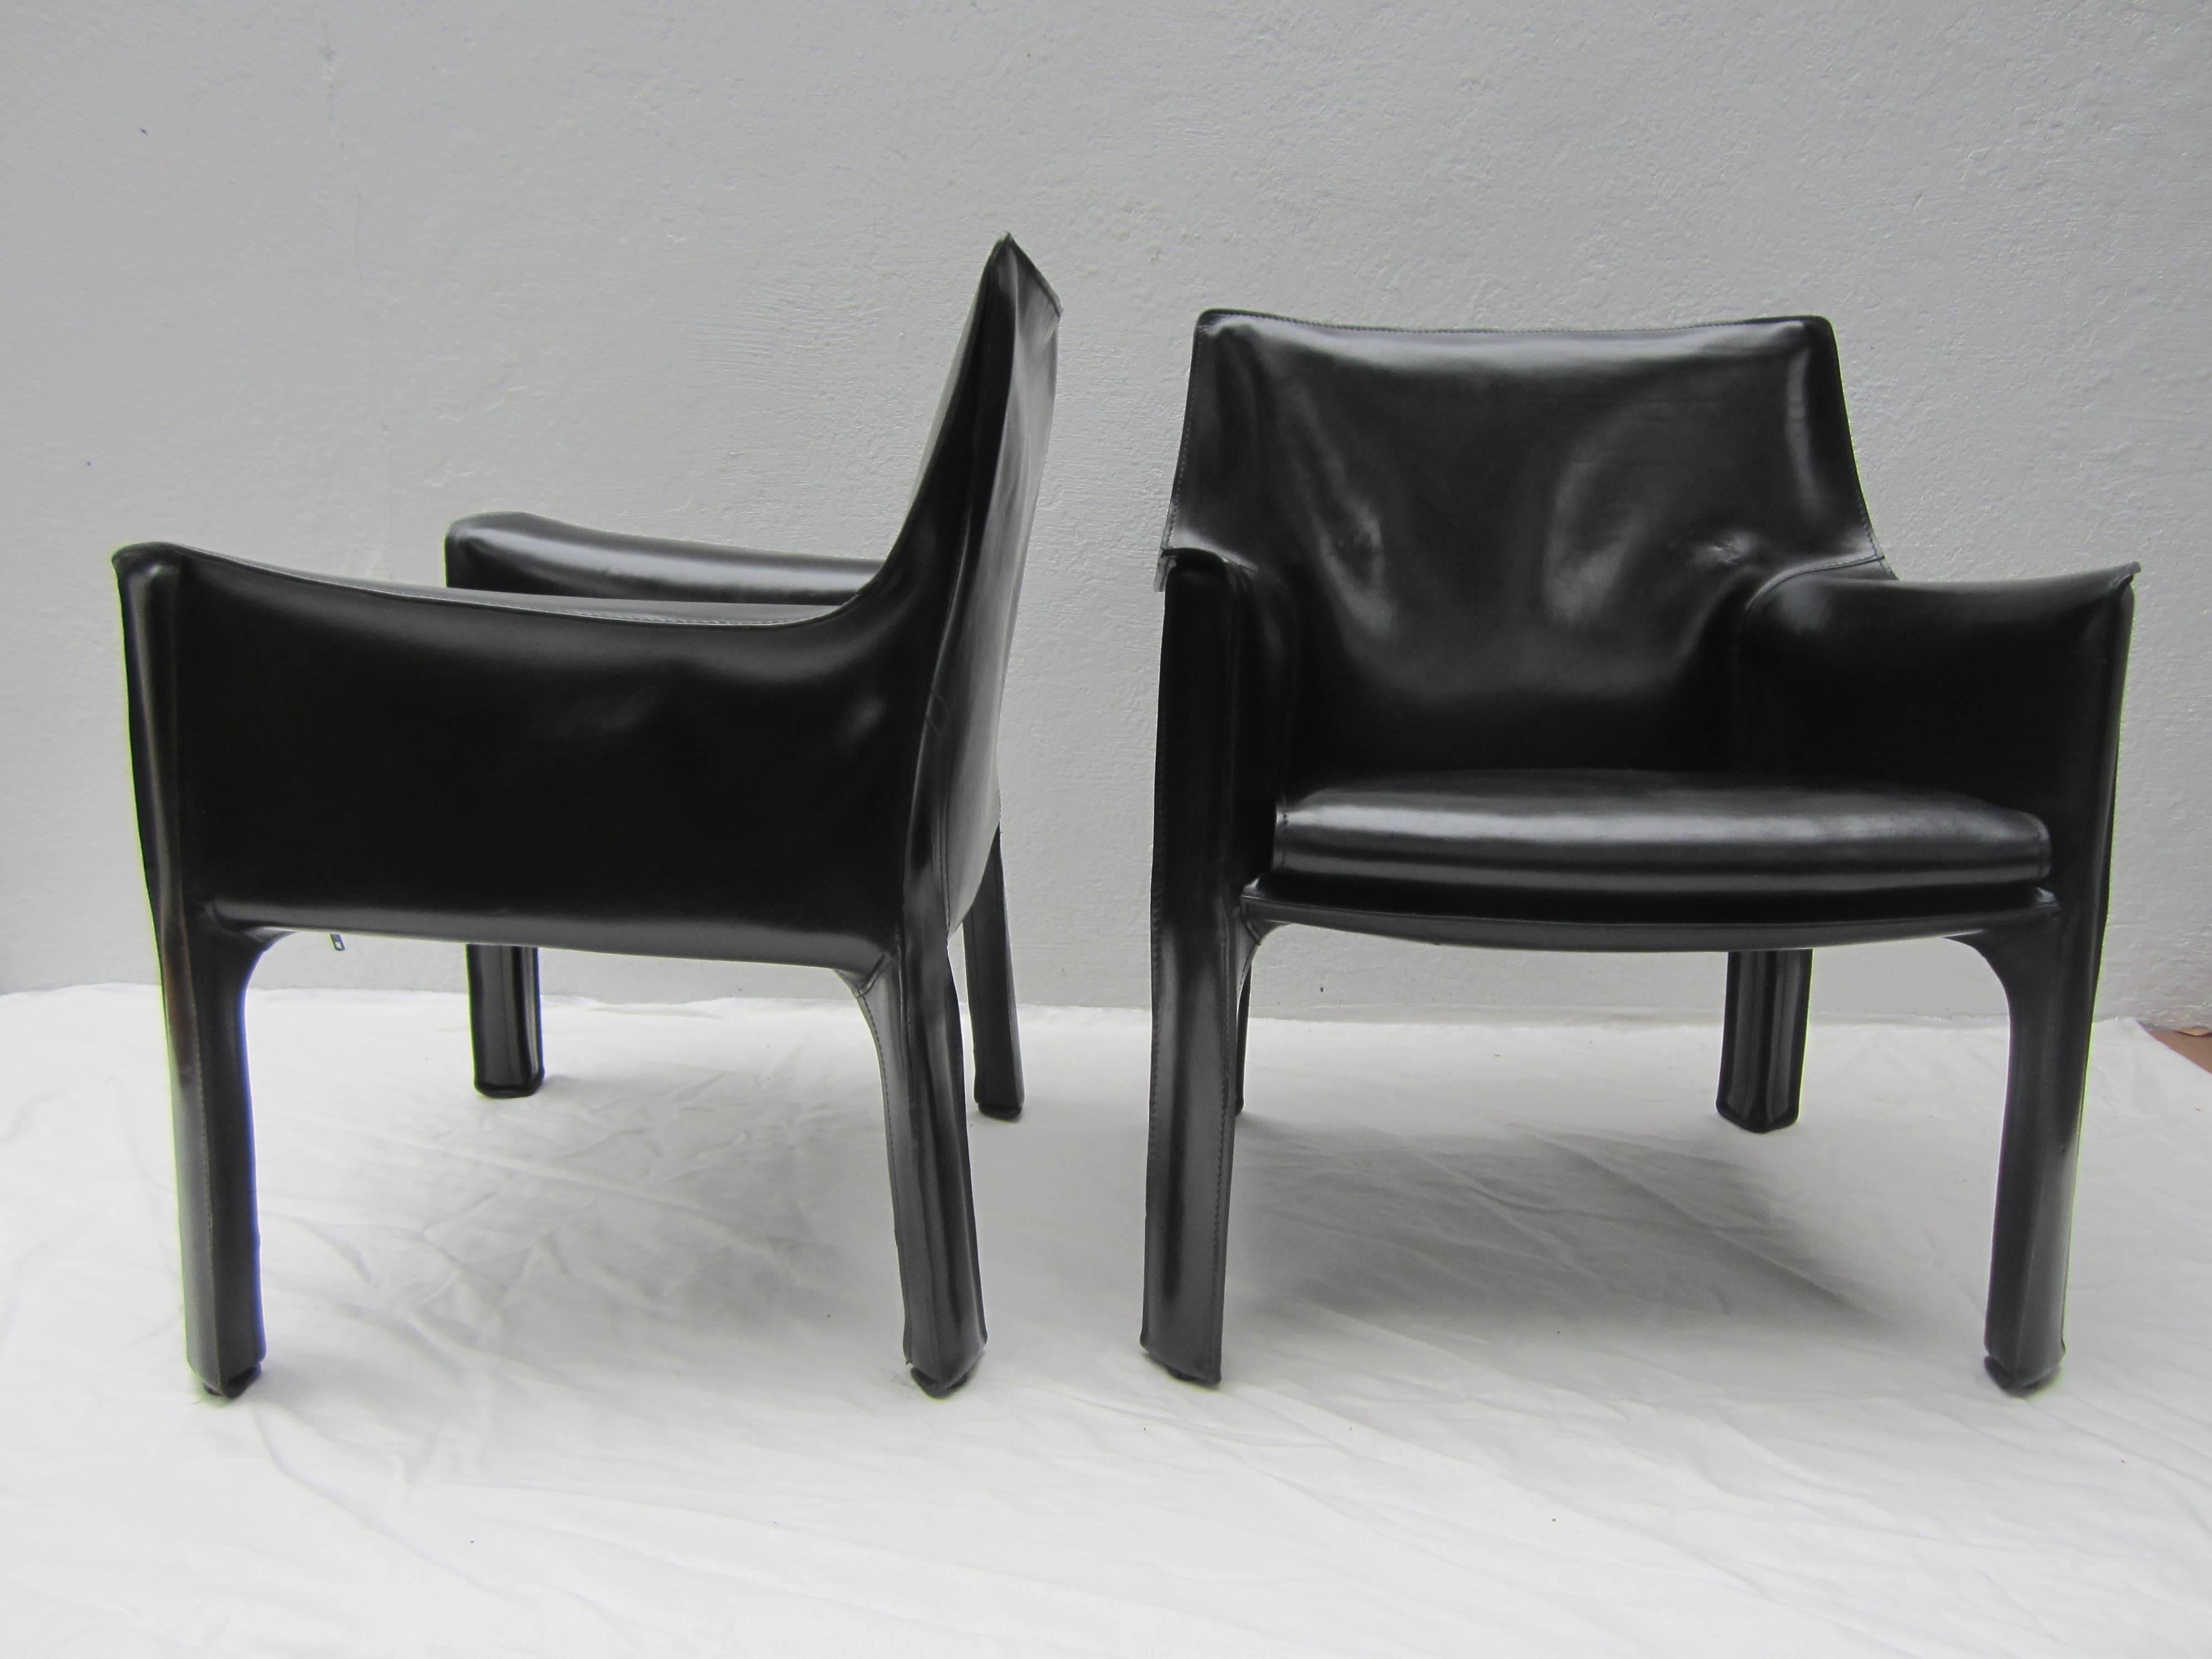 Italian Pair of Black Leather Cab Lounge Chairs by Mario Bellini for Cassina